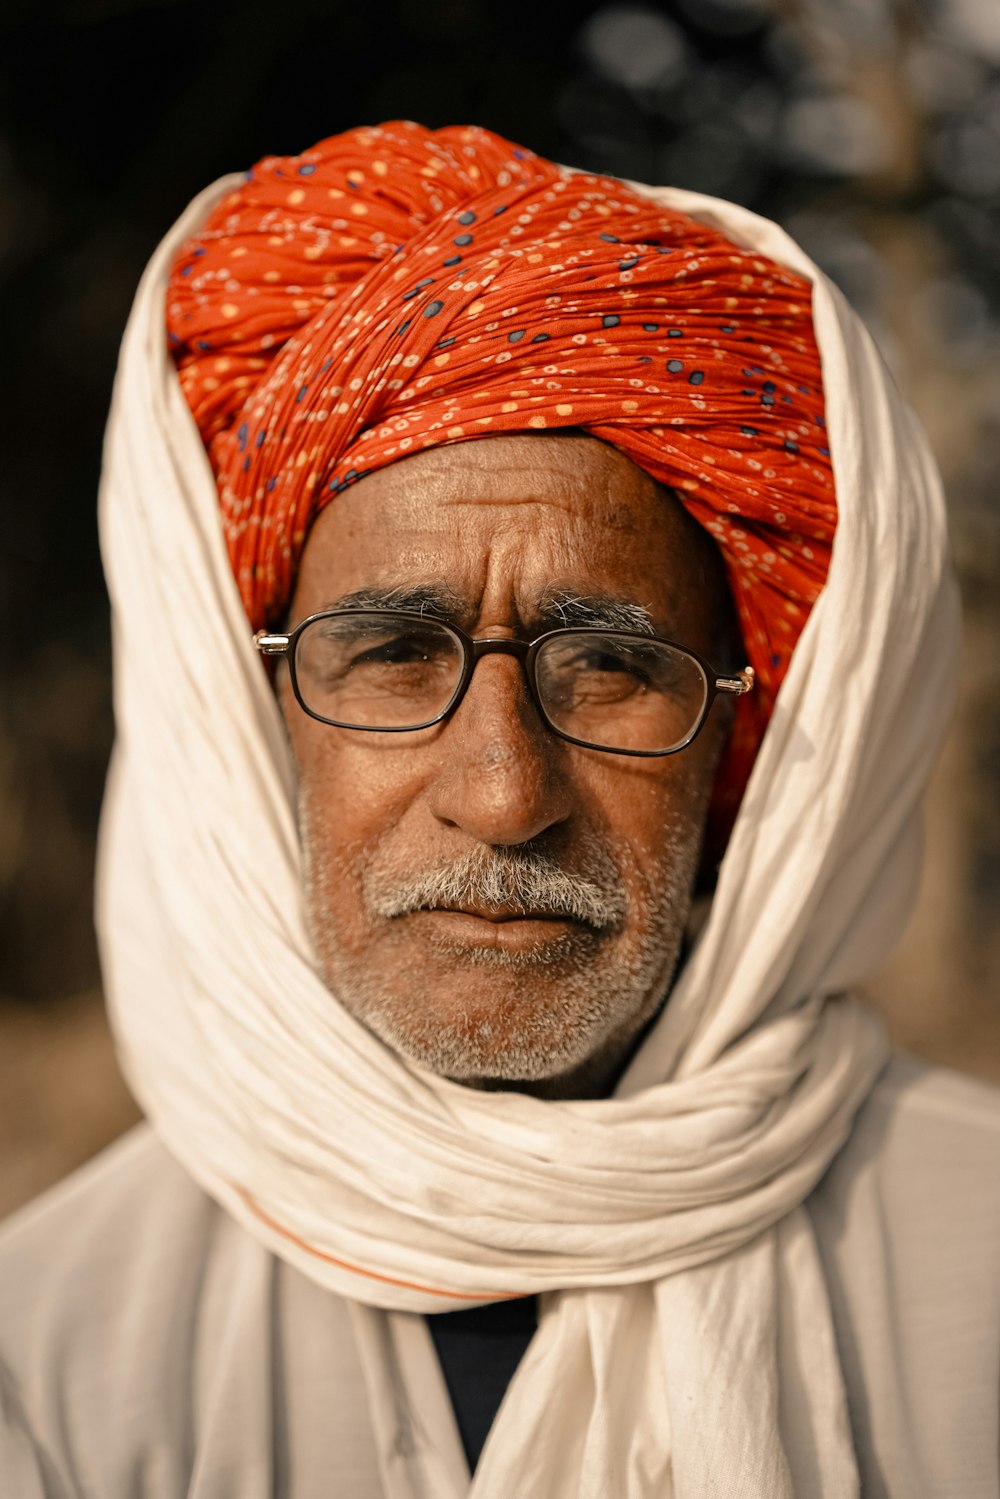 a man wearing a red turban and glasses